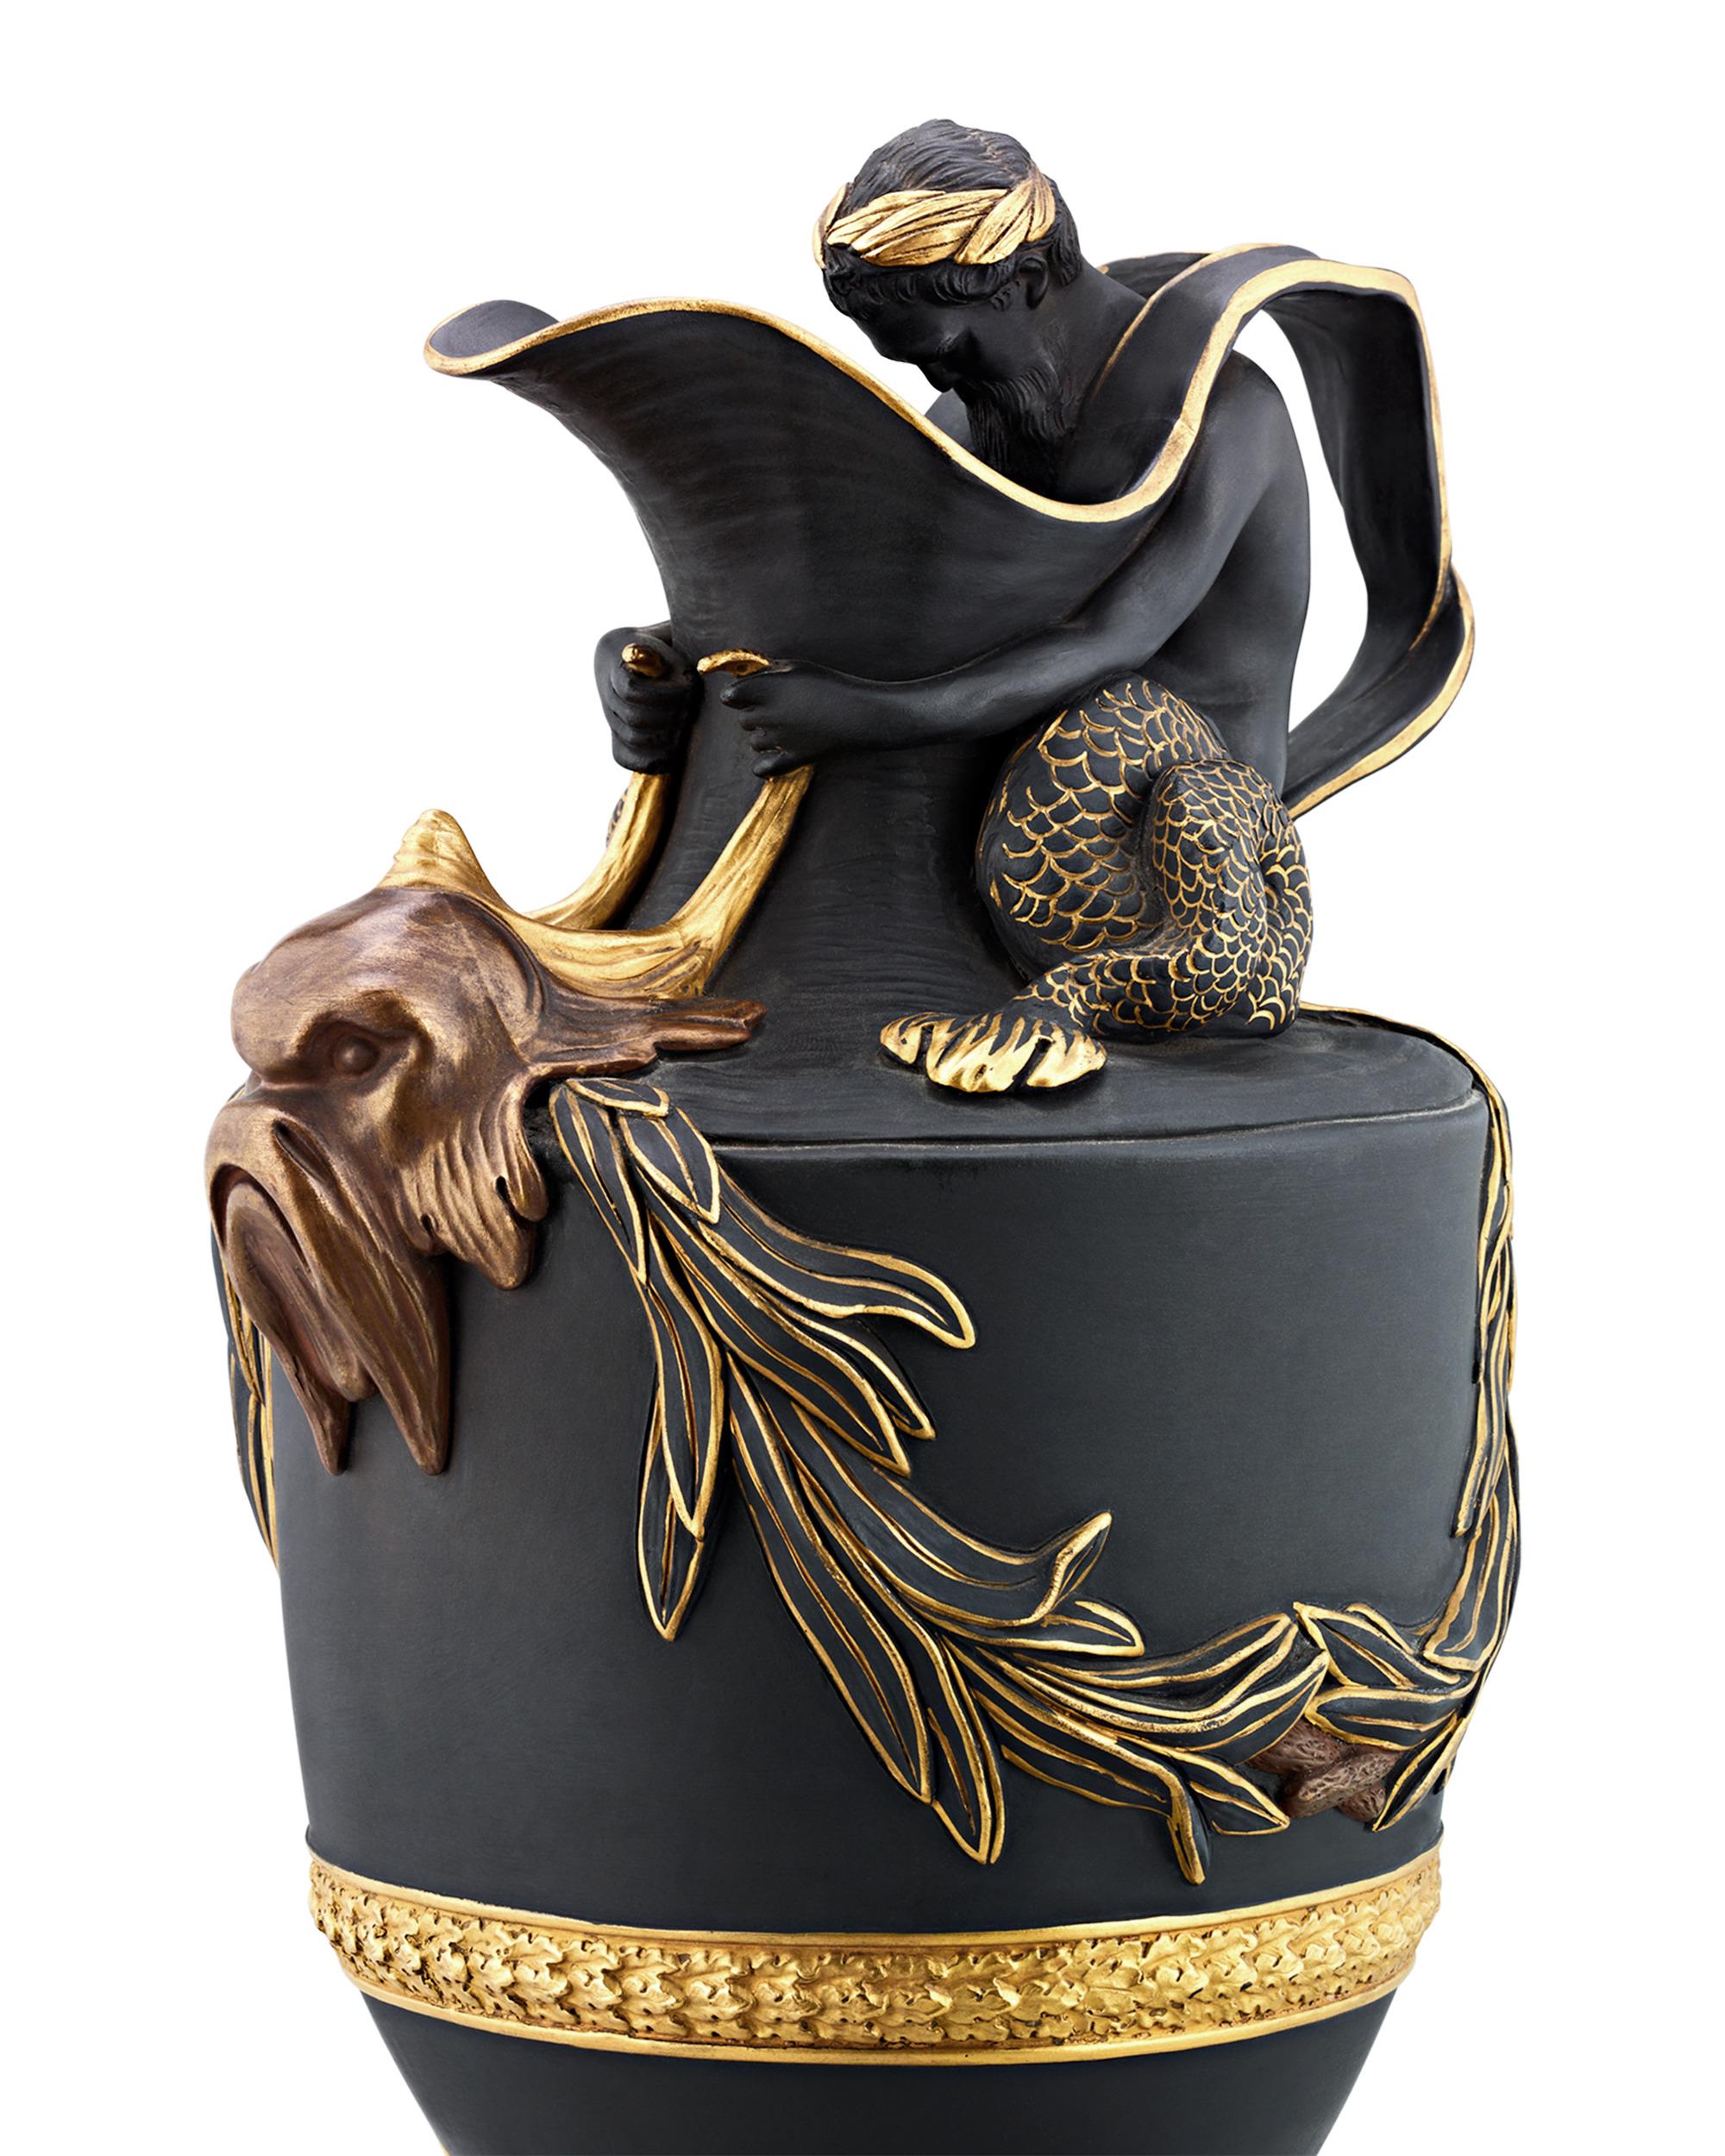 Crafted by Wedgwood, this exquisite pair of 19th-century gilt bronze and black basalt Neoclassical ewers epitomizes the quality and creativity of renowned Wedgwood designer John Flaxman. Meant to hold water or wine, each vessel showcases a